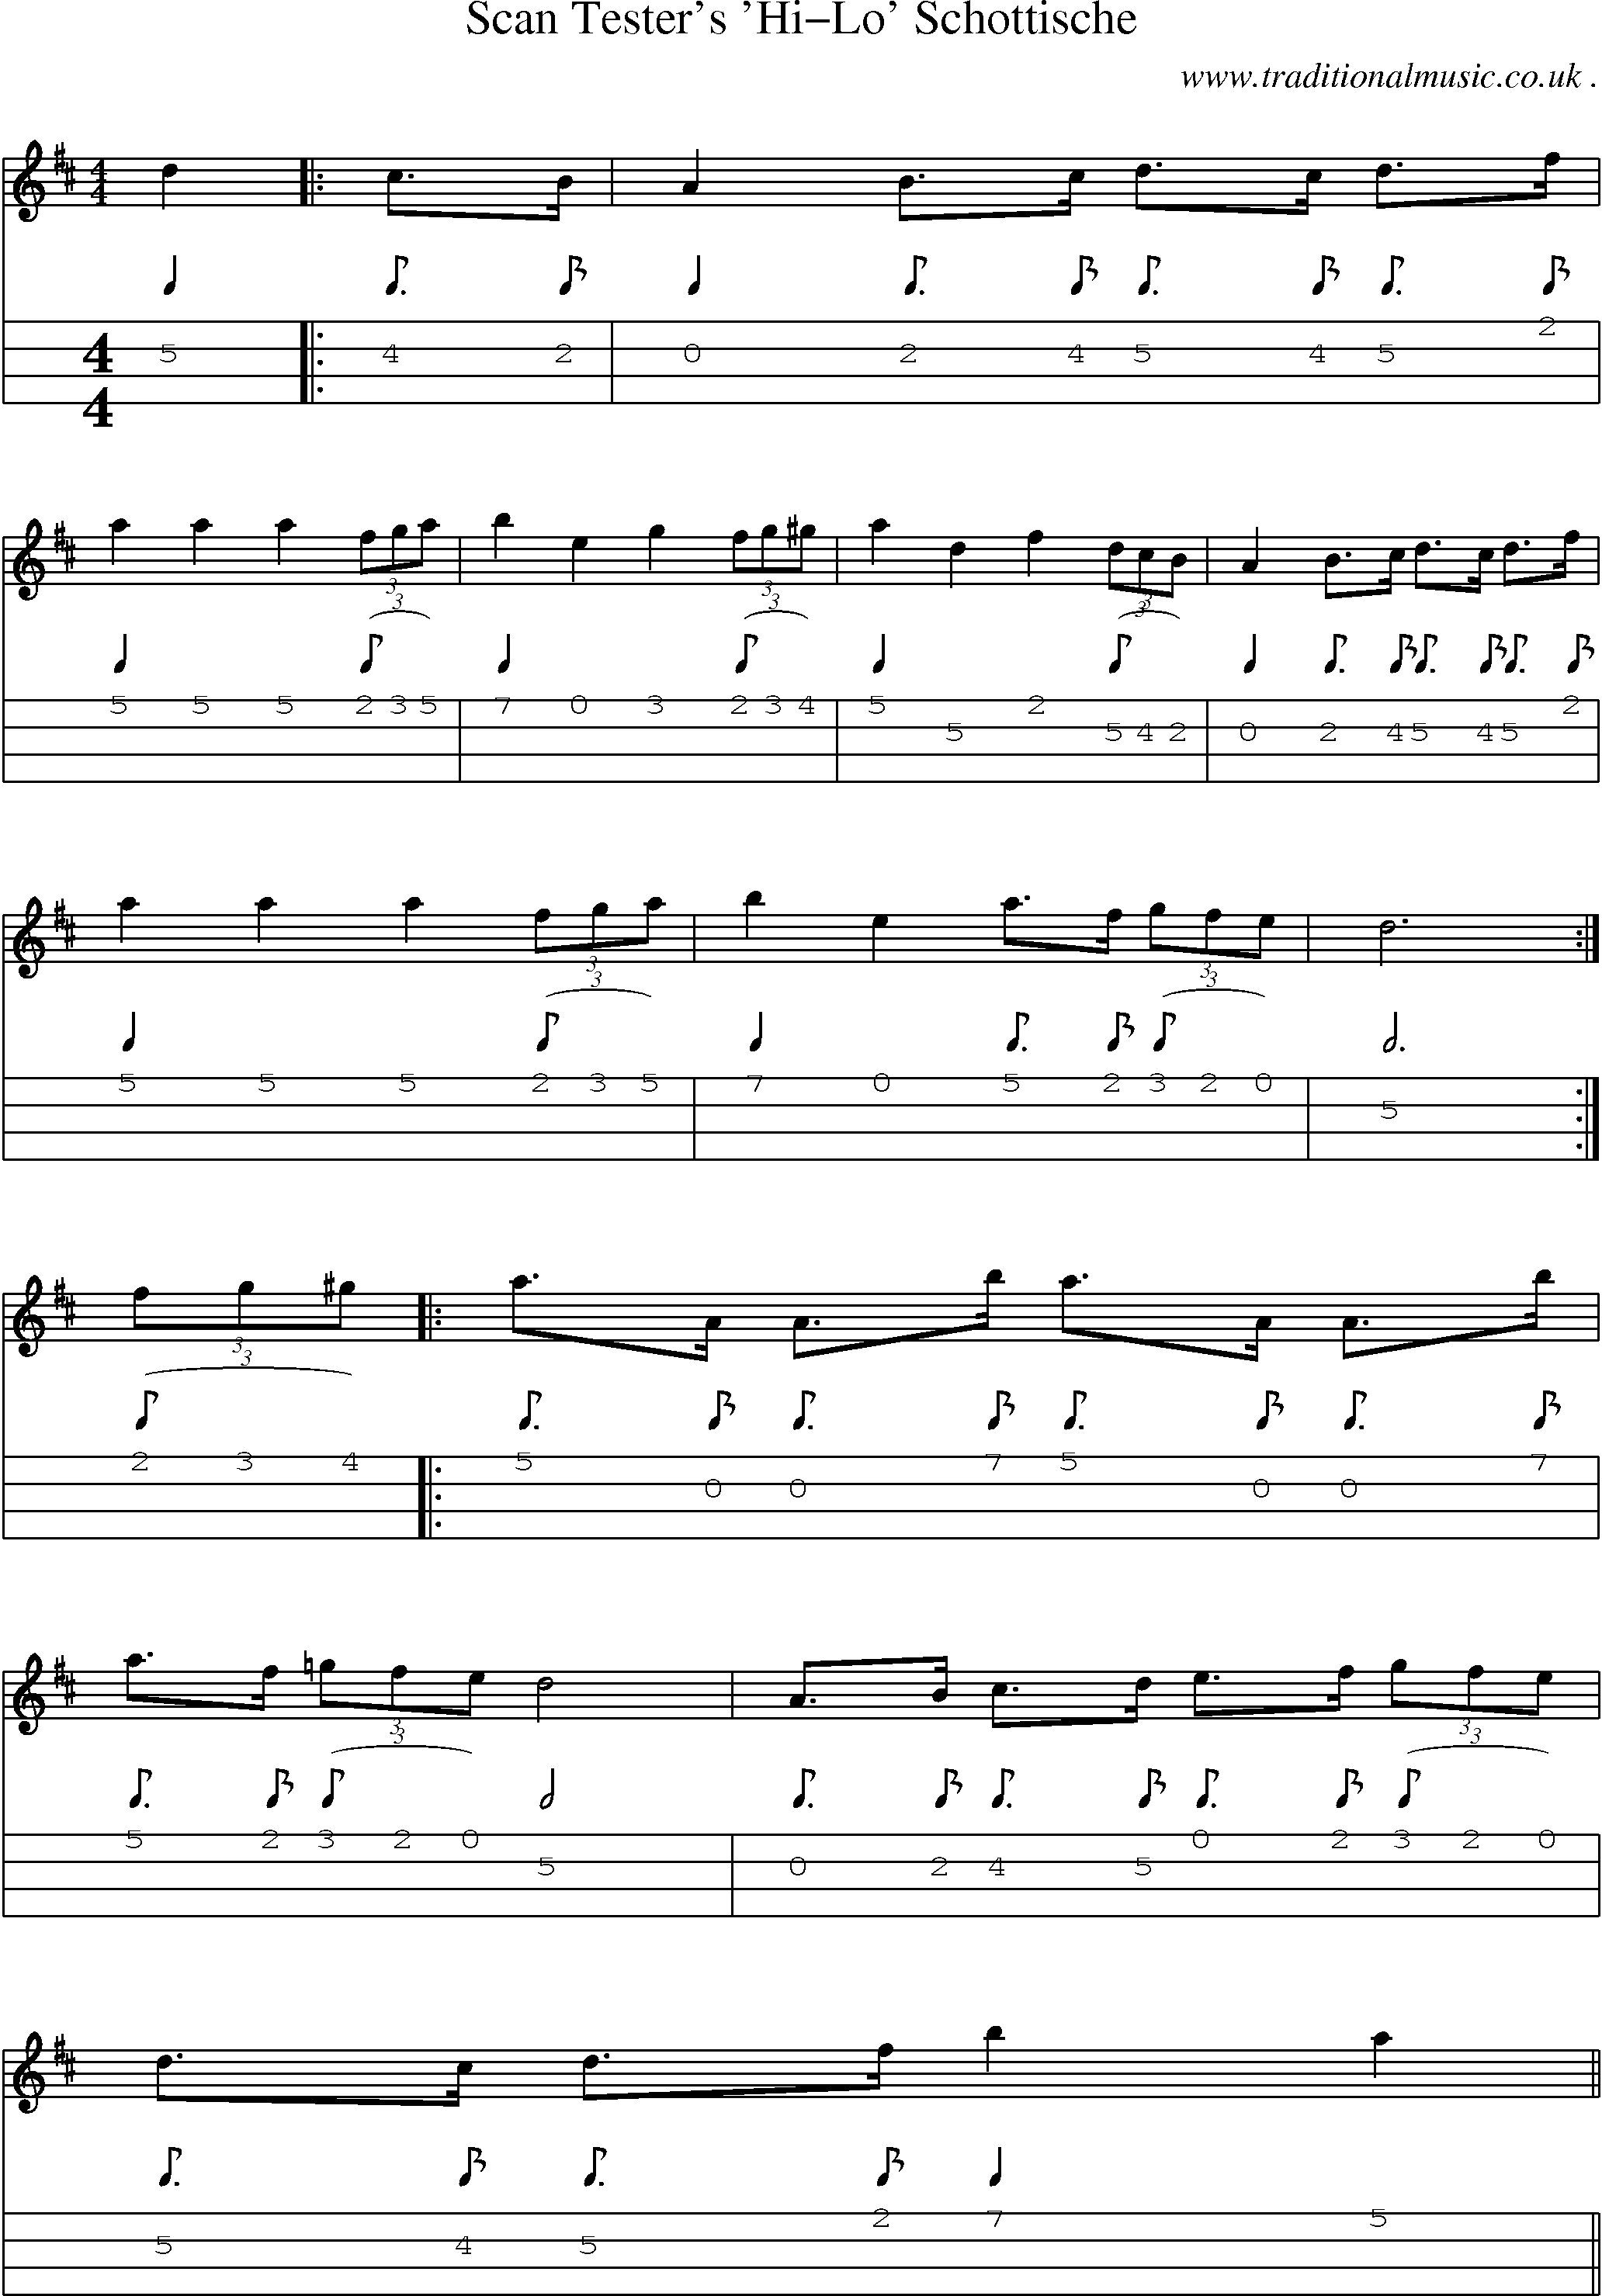 Sheet-Music and Mandolin Tabs for Scan Testers Hi-lo Schottische